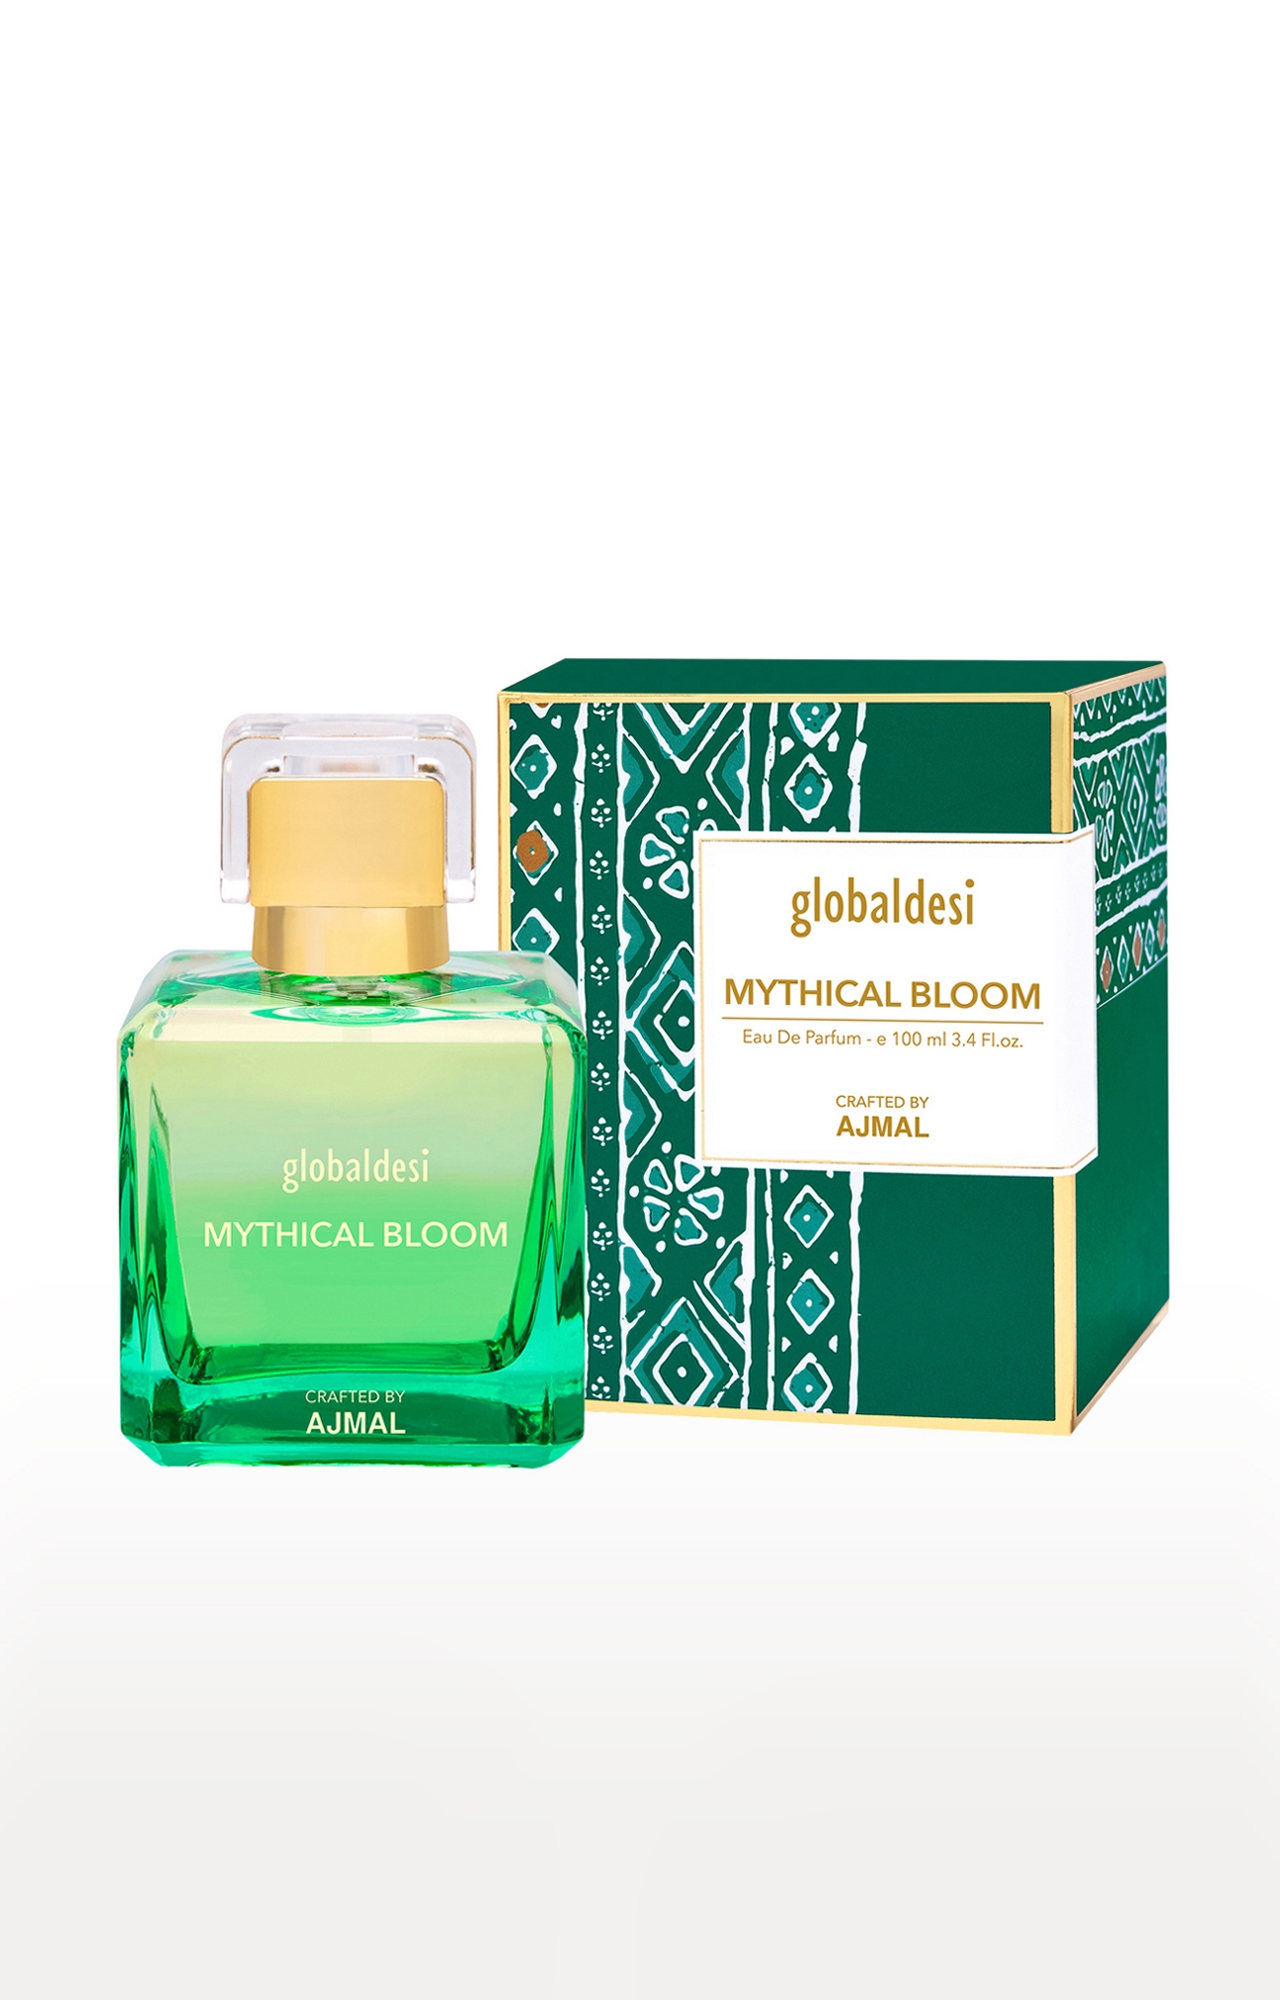 Global Mythical Bloom Trance Eau De Parfum 100ML Long Lasting Scent Spray Gift For Women Crafted By Ajmal